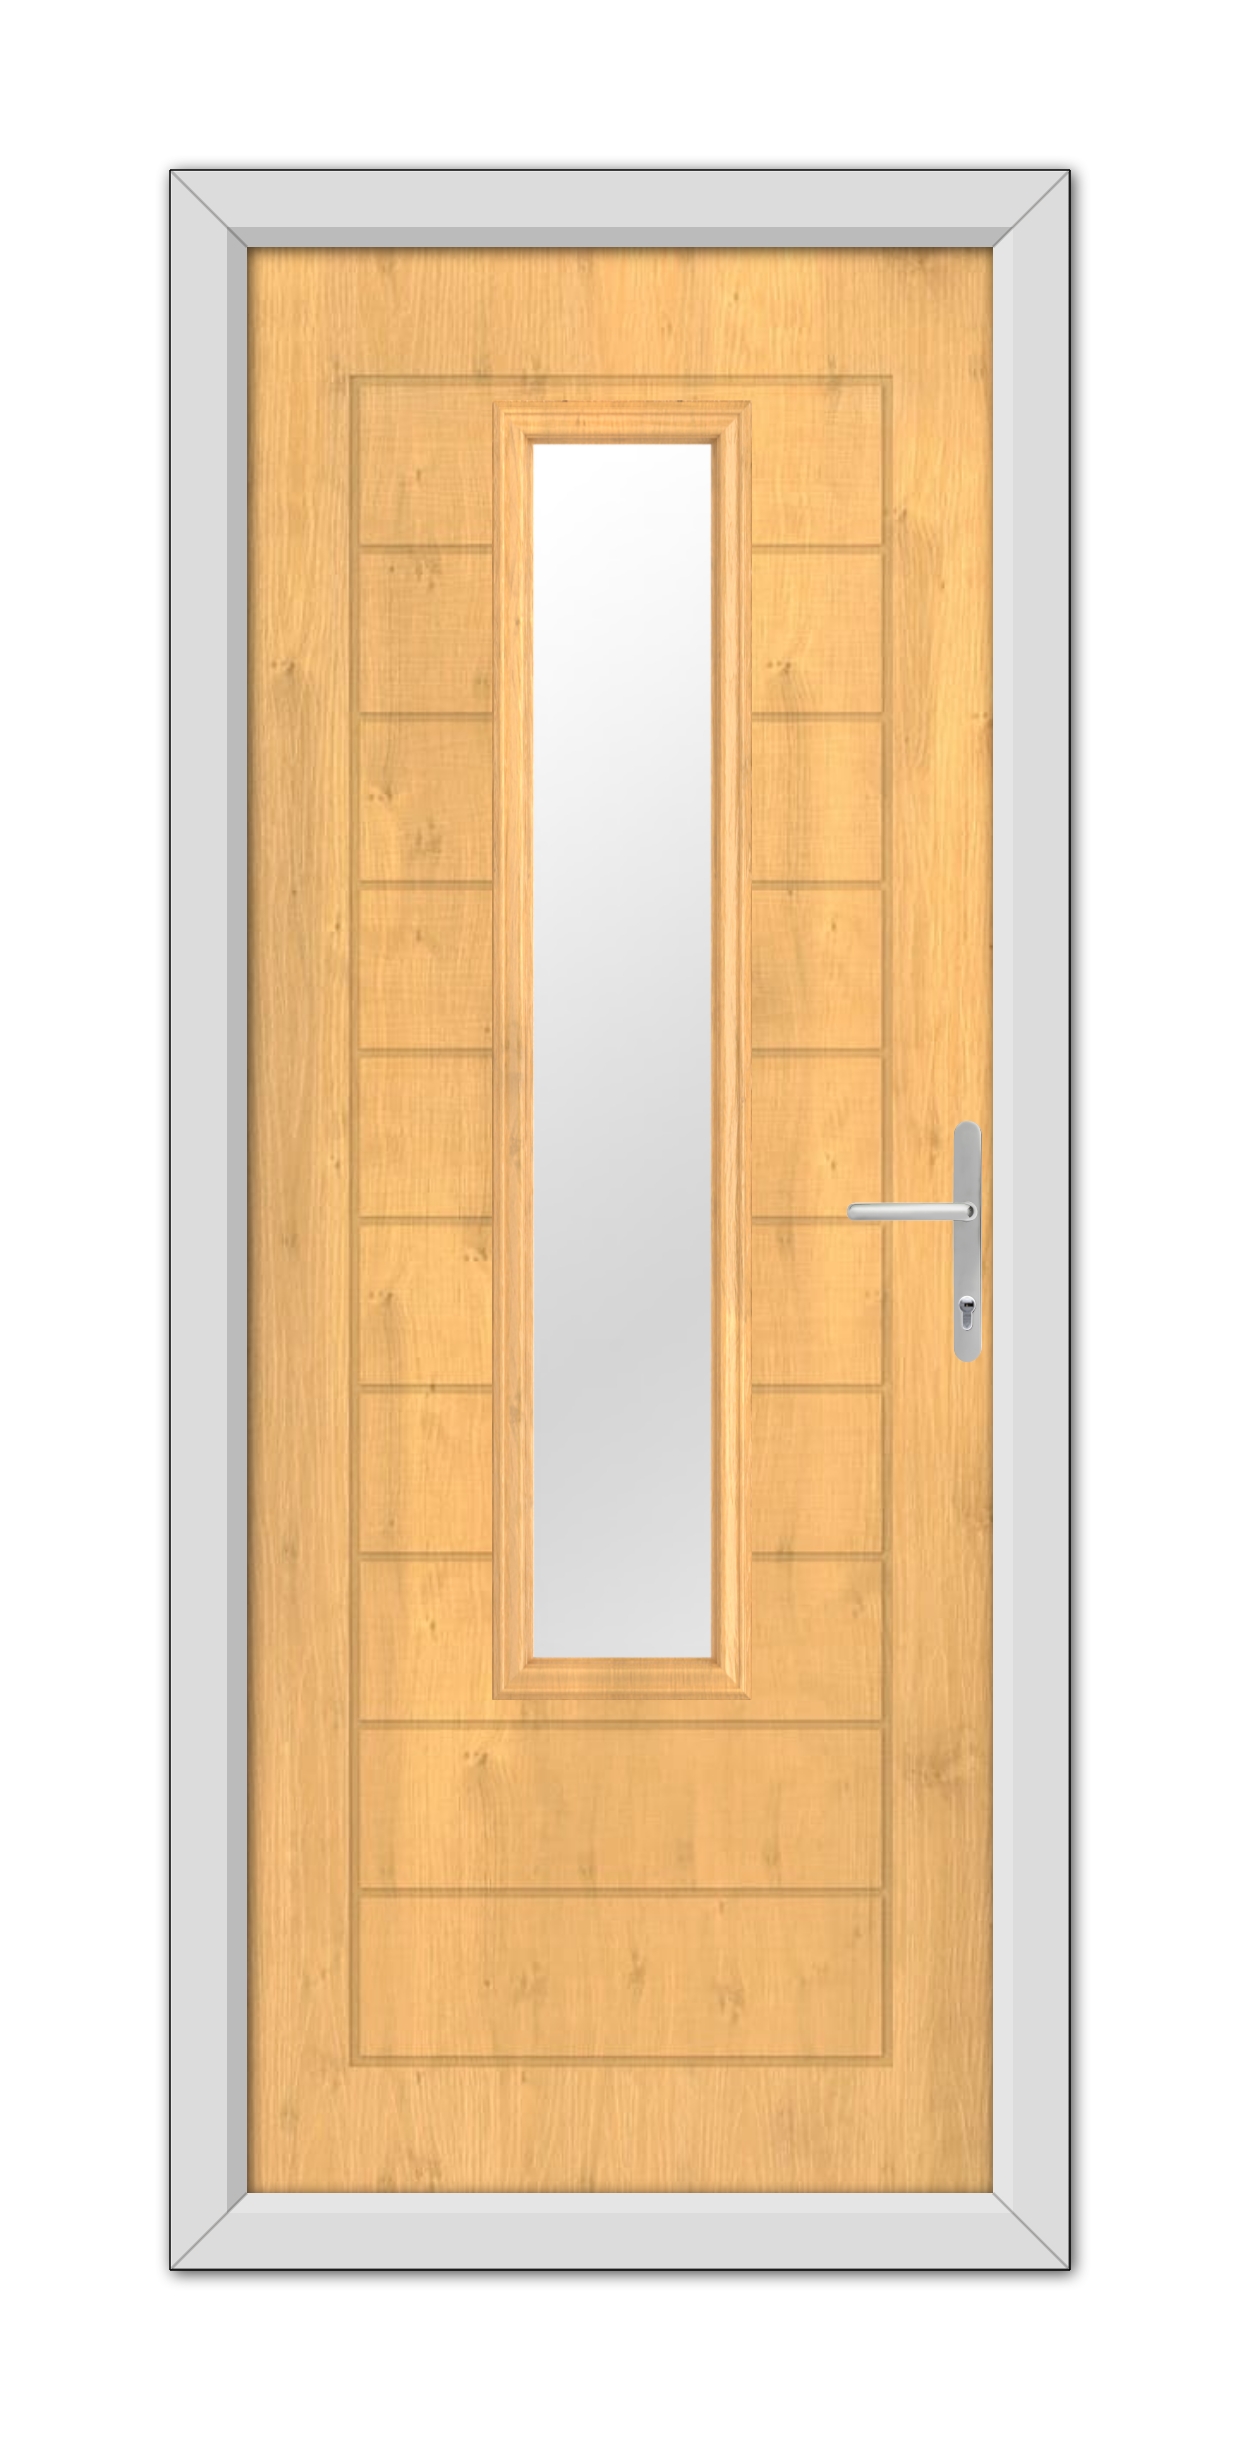 An Irish Oak Bedford Composite Door 48mm Timber Core with a vertical rectangular glass panel and a metal handle, set within a white frame.